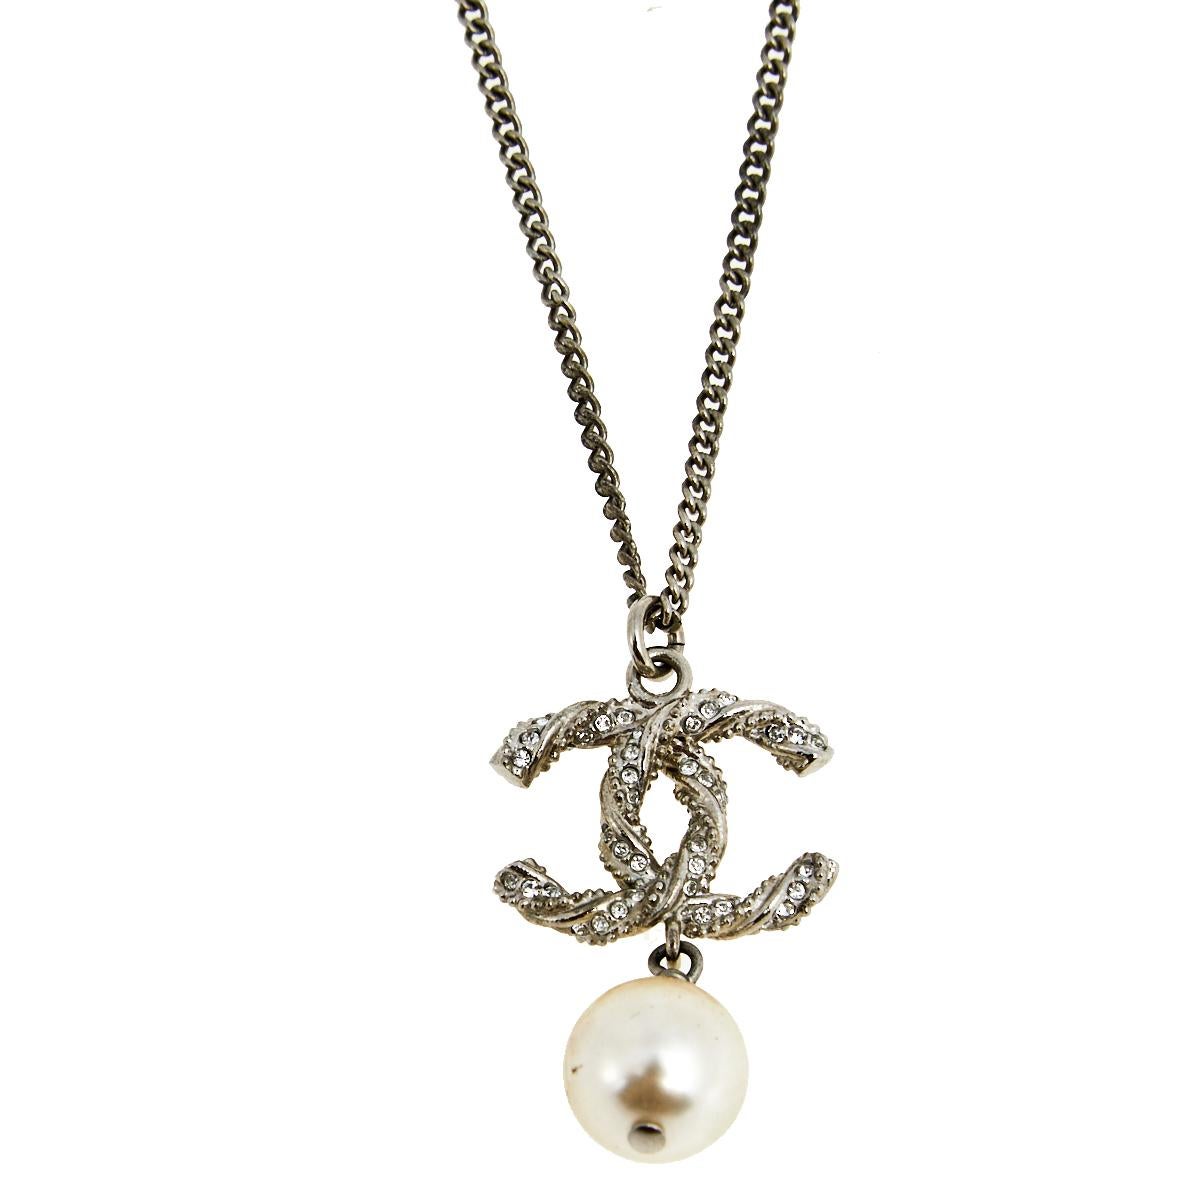 From the house of Chanel, this classic piece is designed with a chain secured by a lobster clasp closure. It features a twisted, interlocked 'CC' logo pendant enhanced with crystal embellishments and accompanied by faux pearl drop. Wear with blouses